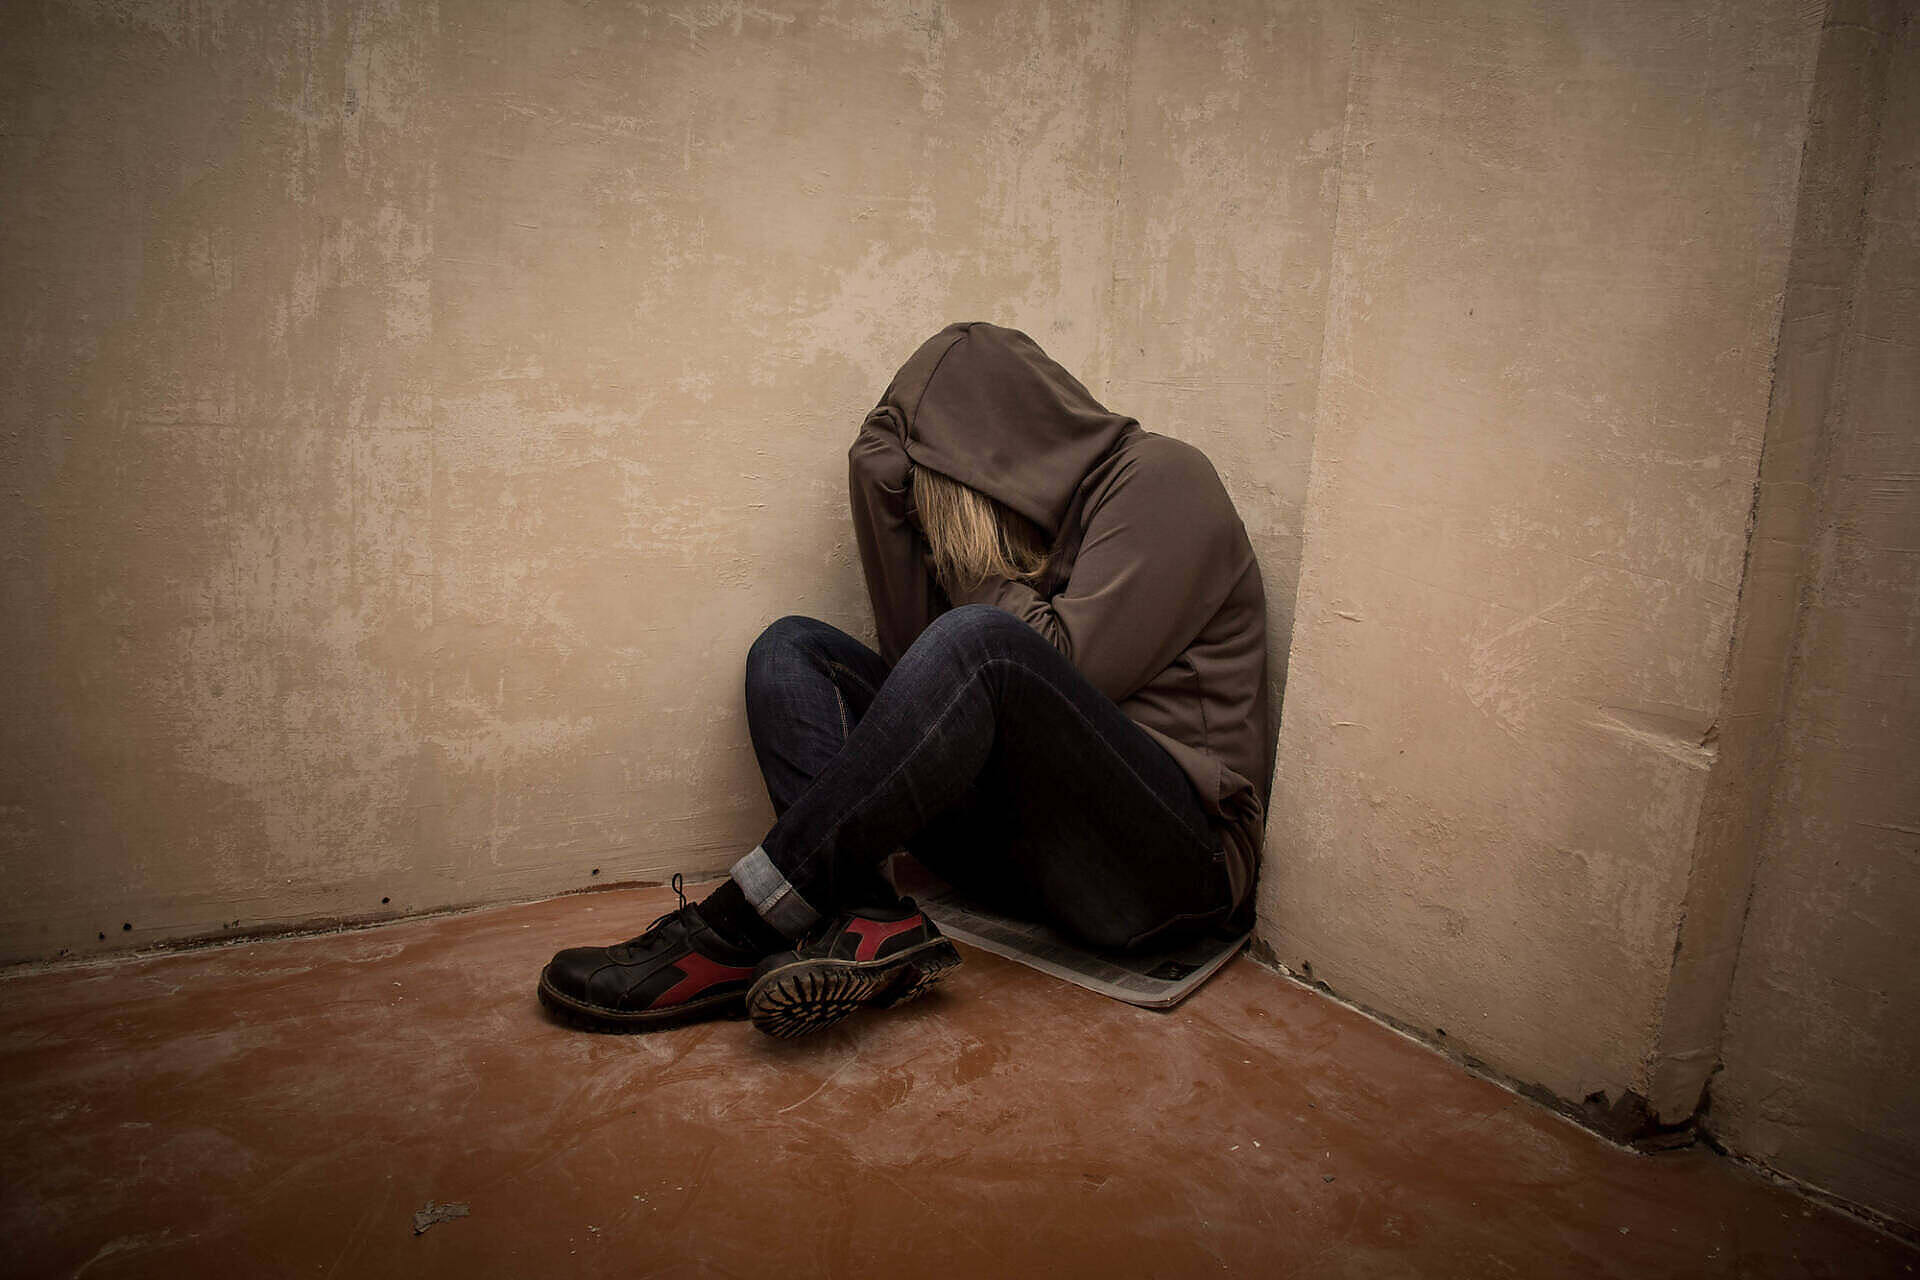 Person in hoodie sitting alone in corner, depicting depression and isolation often associated with addiction